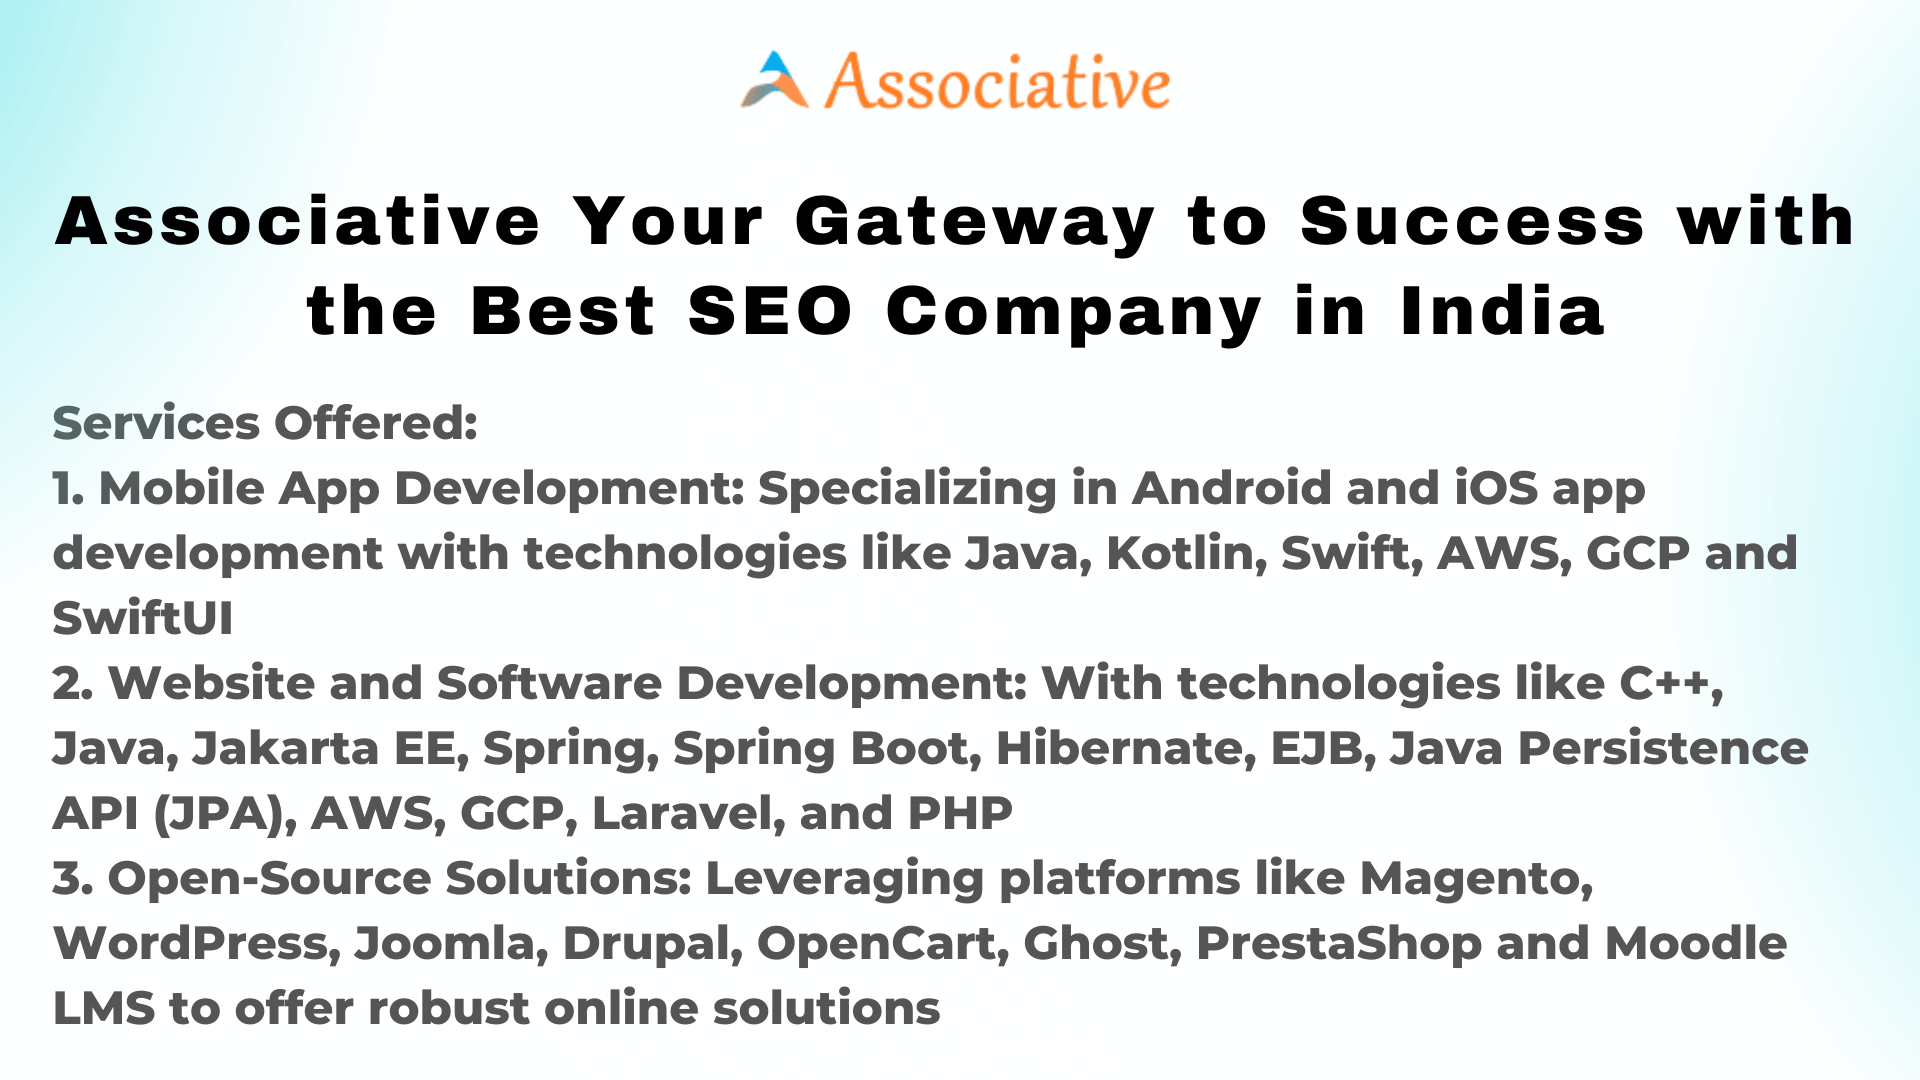 Associative Your Gateway to Success with the Best SEO Company in India